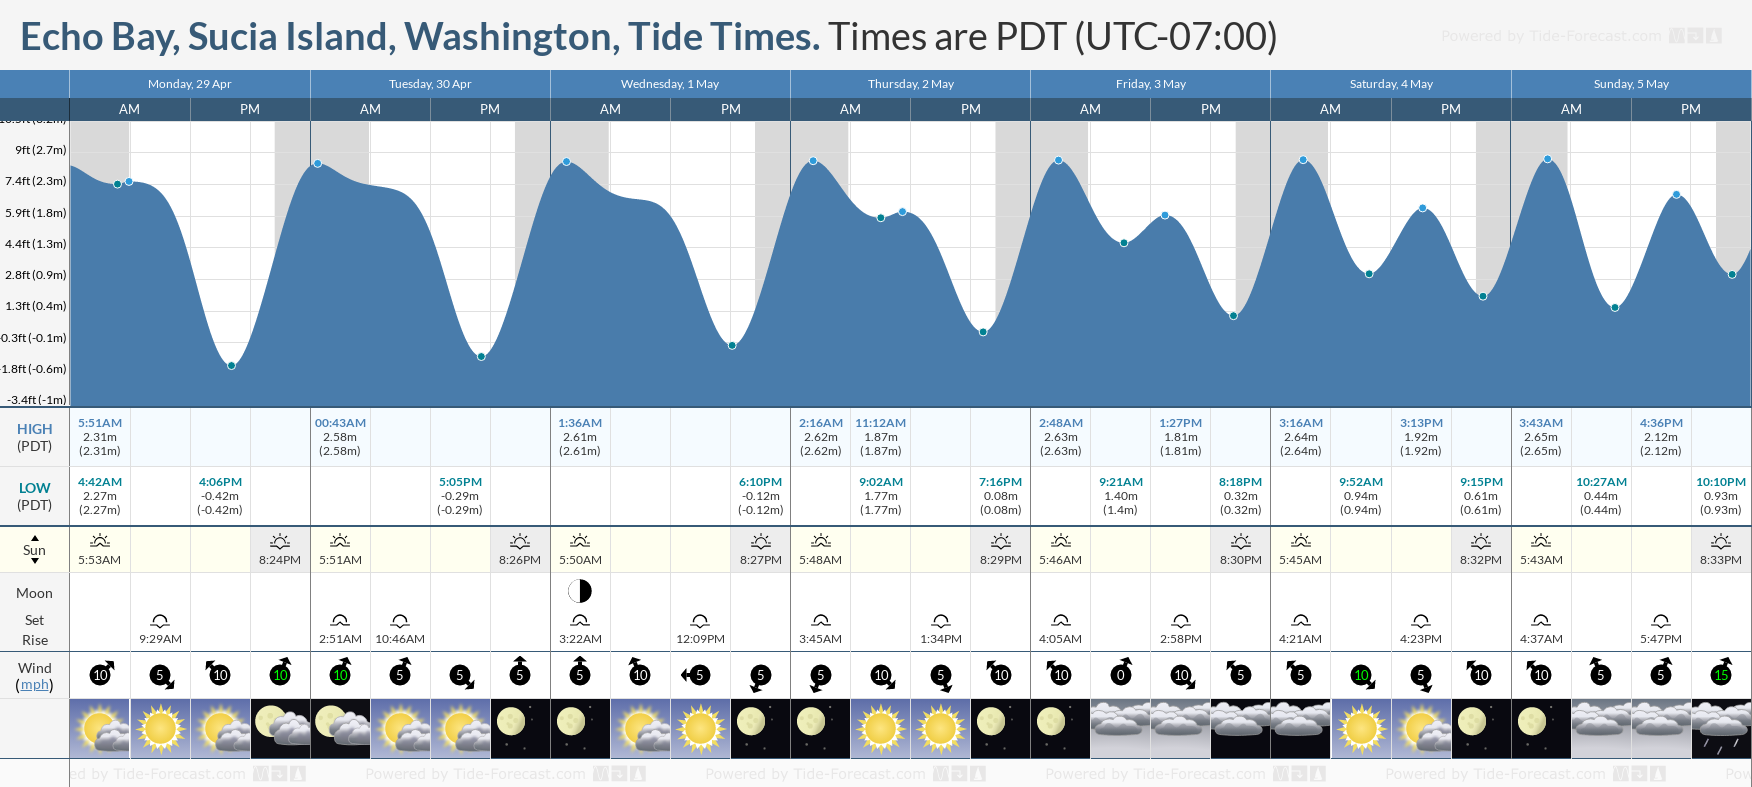 Echo Bay, Sucia Island, Washington Tide Chart including high and low tide tide times for the next 7 days